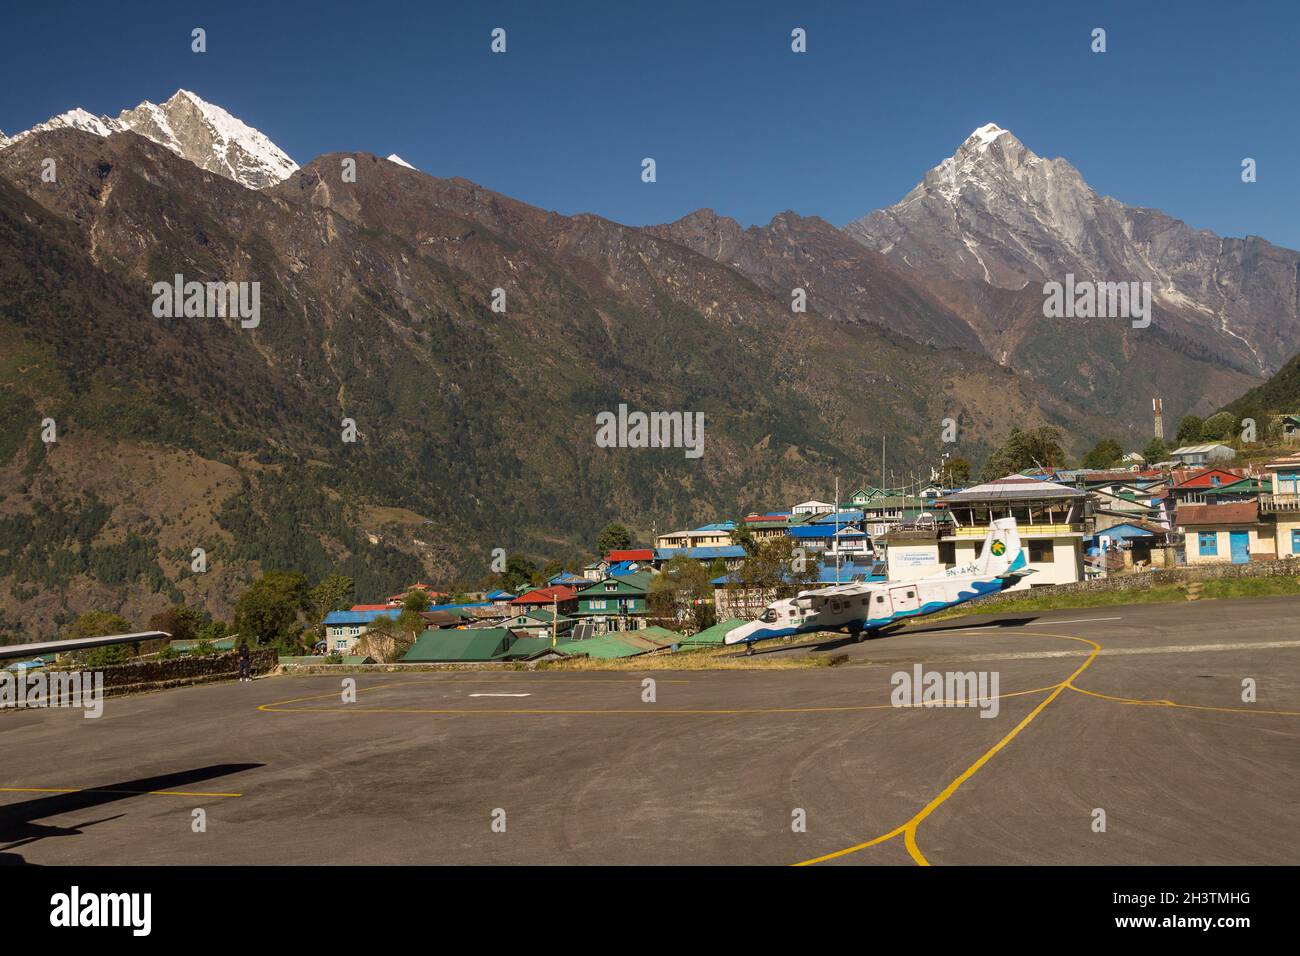 Tara Air aircraft taking off from the Lukla Airport. There are Karyolung (left) and Nupla peaks above. Solukhumbu, Everest Regio Stock Photo